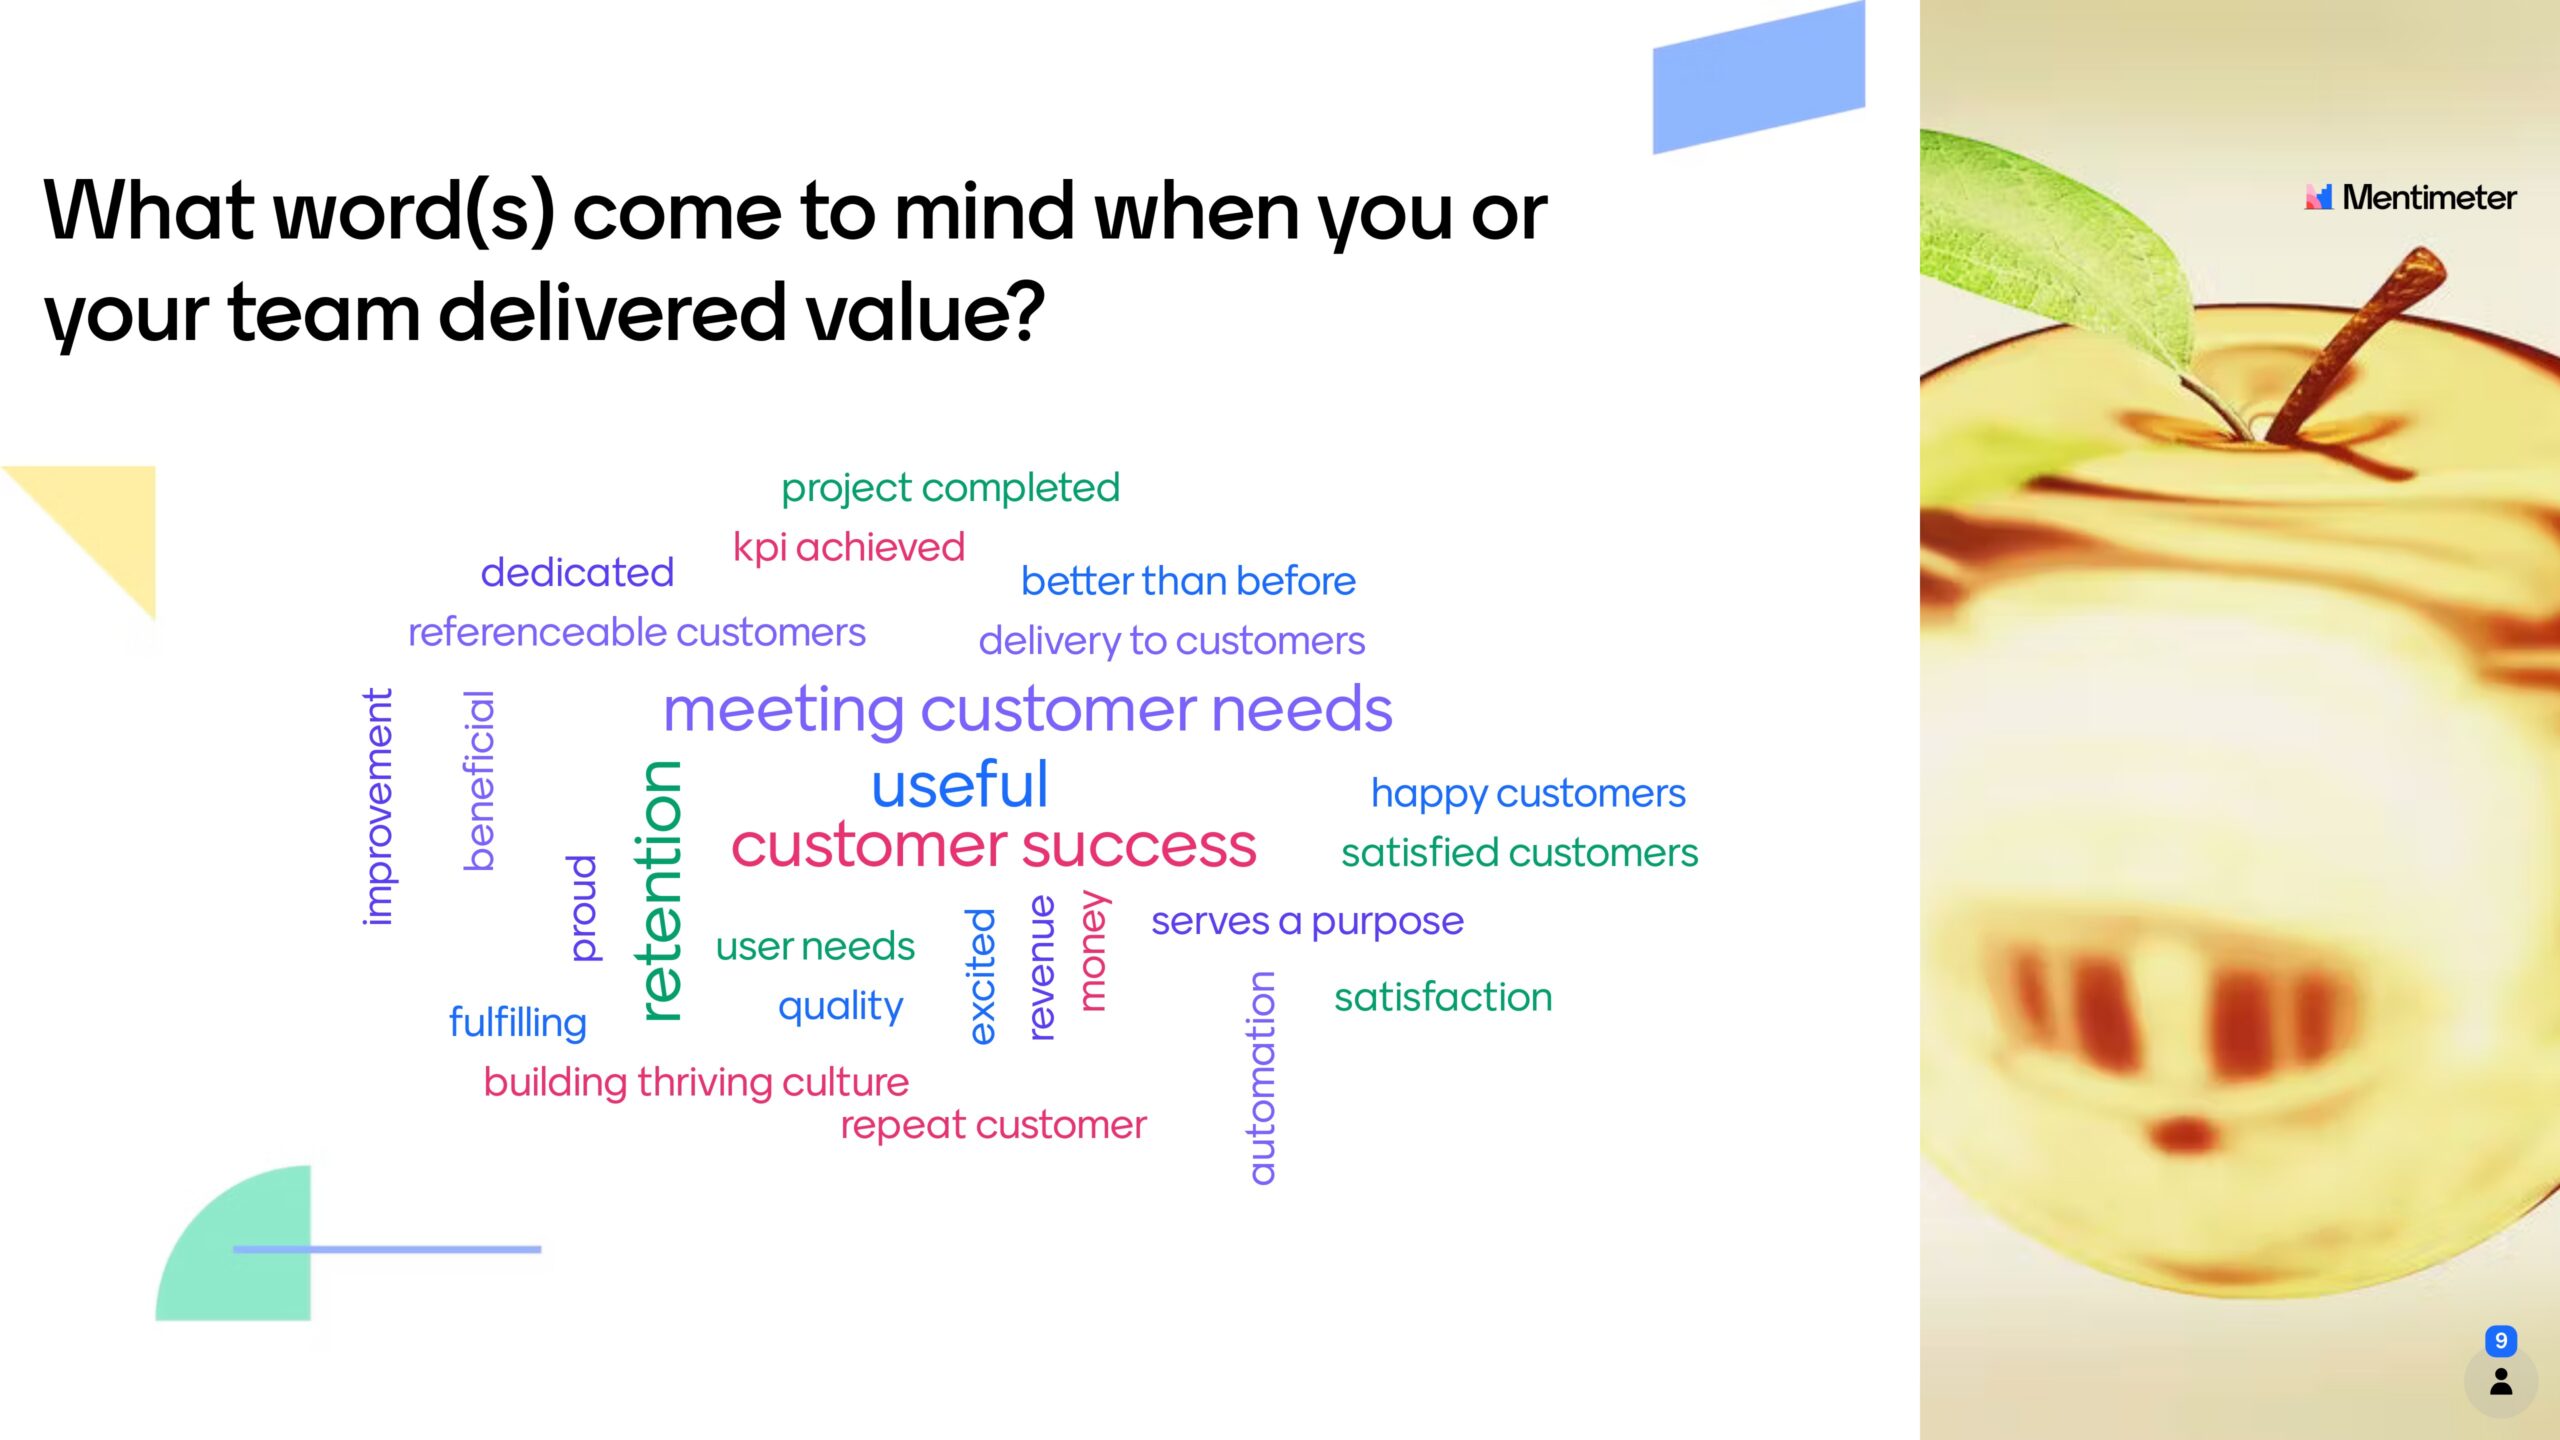 What words come to mind when you or your team delivered value?